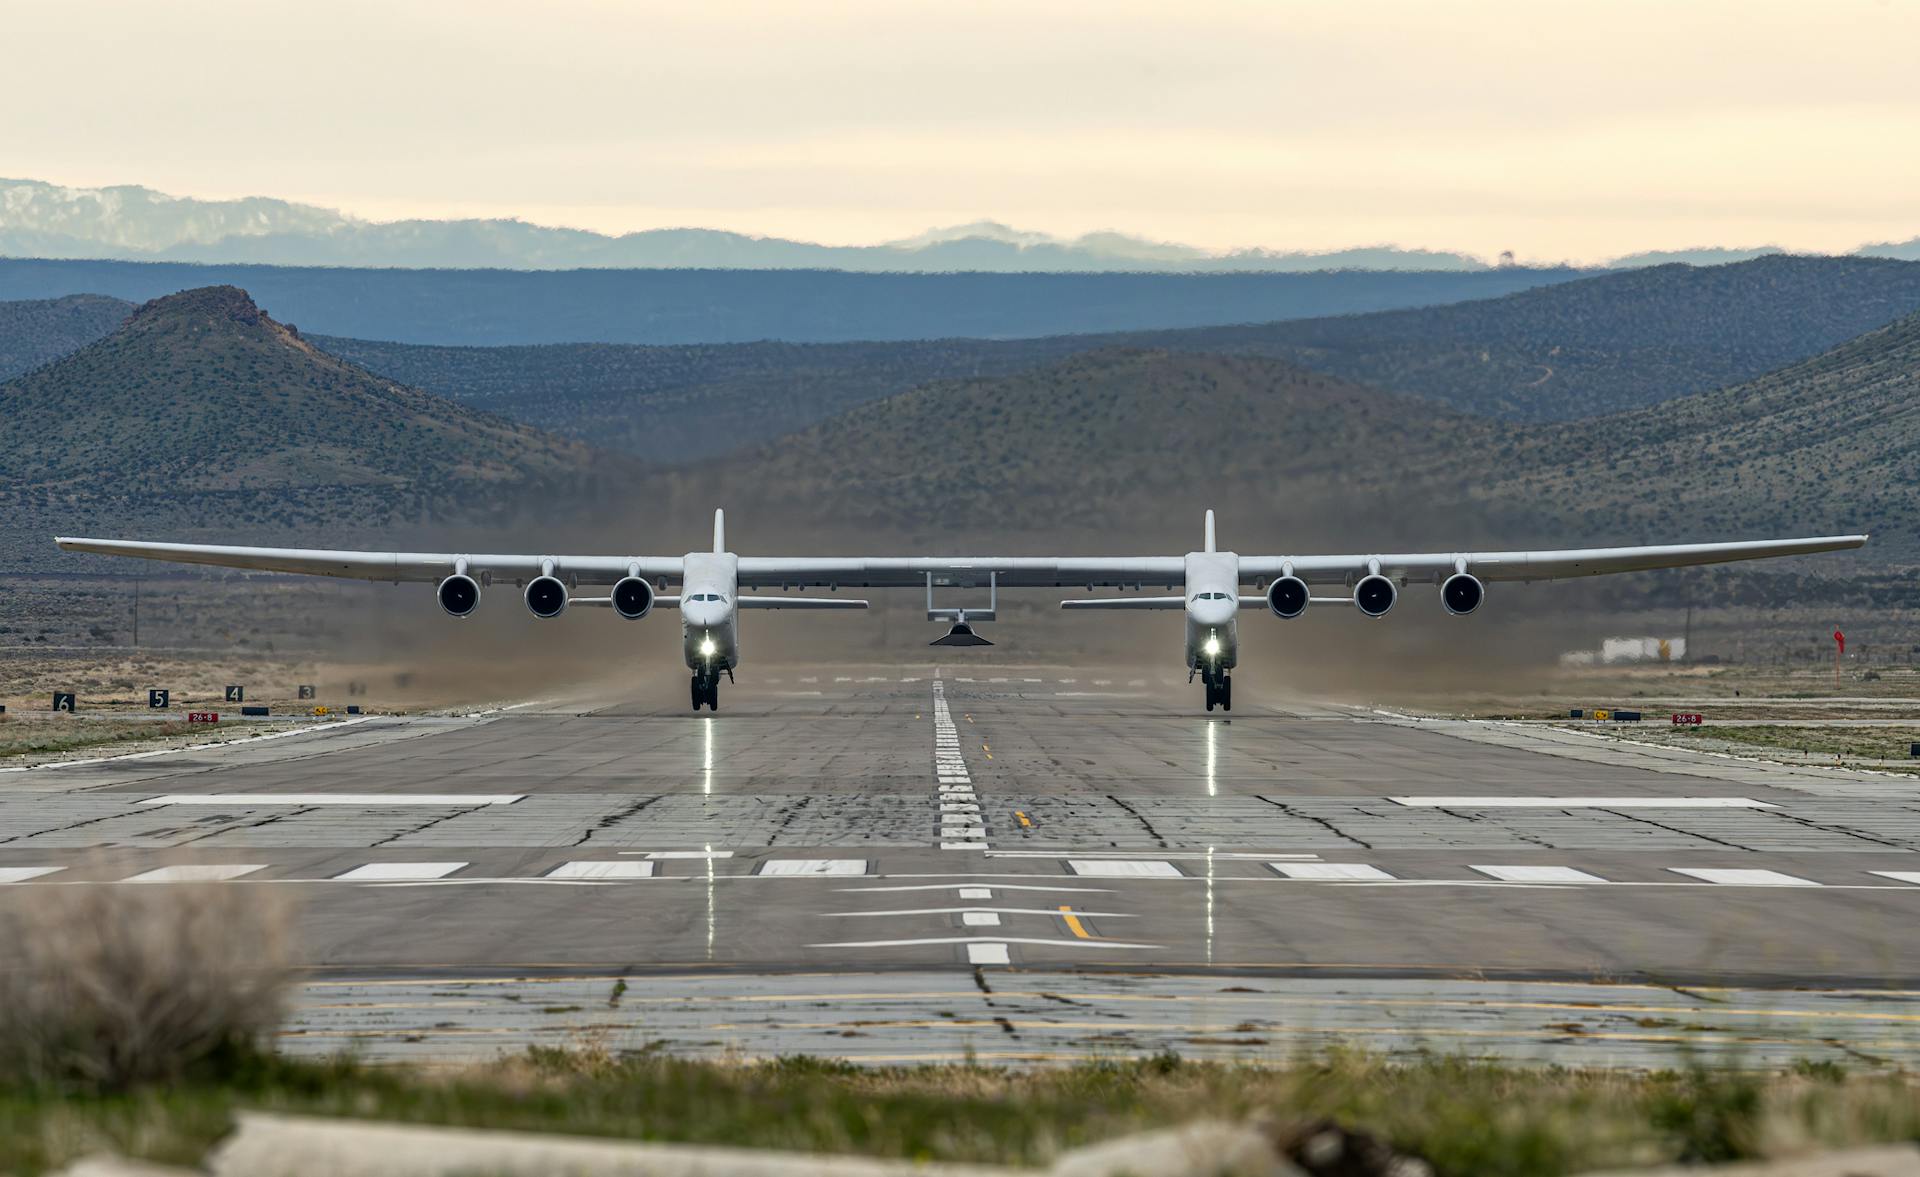 Stratolaunch progresses with second successful captive carry flight of hypersonic vehicle